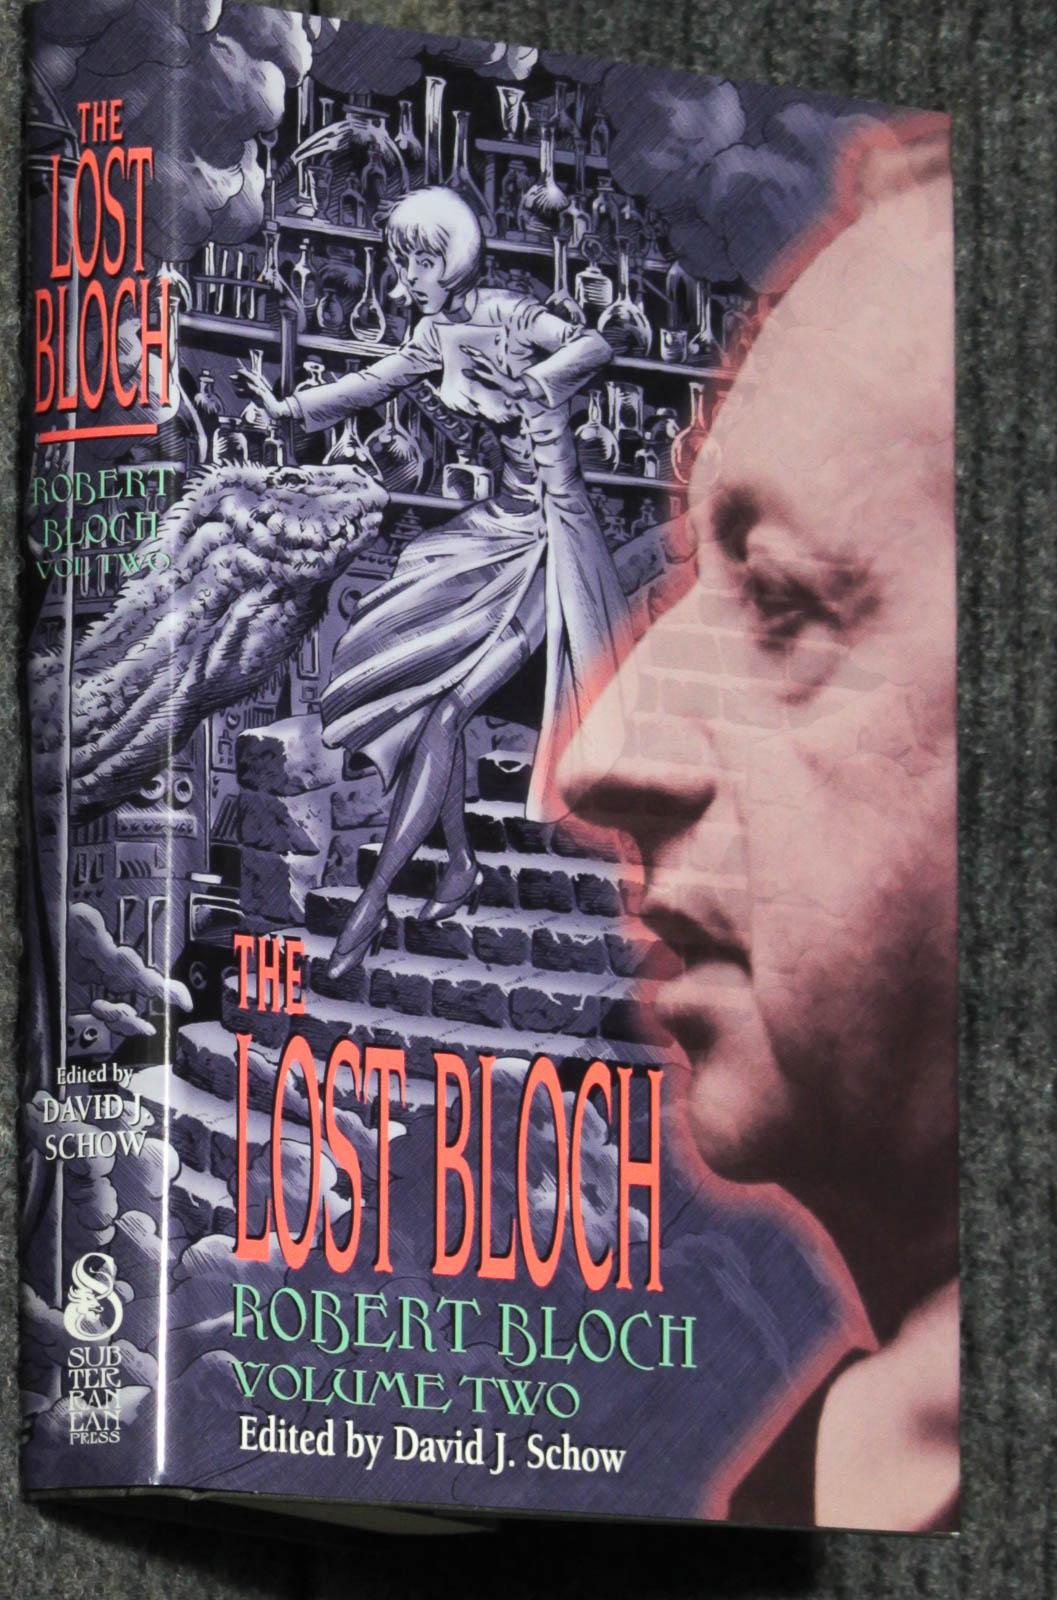 Image for Hell On Earth: The Lost Bloch, Volume II [signed]